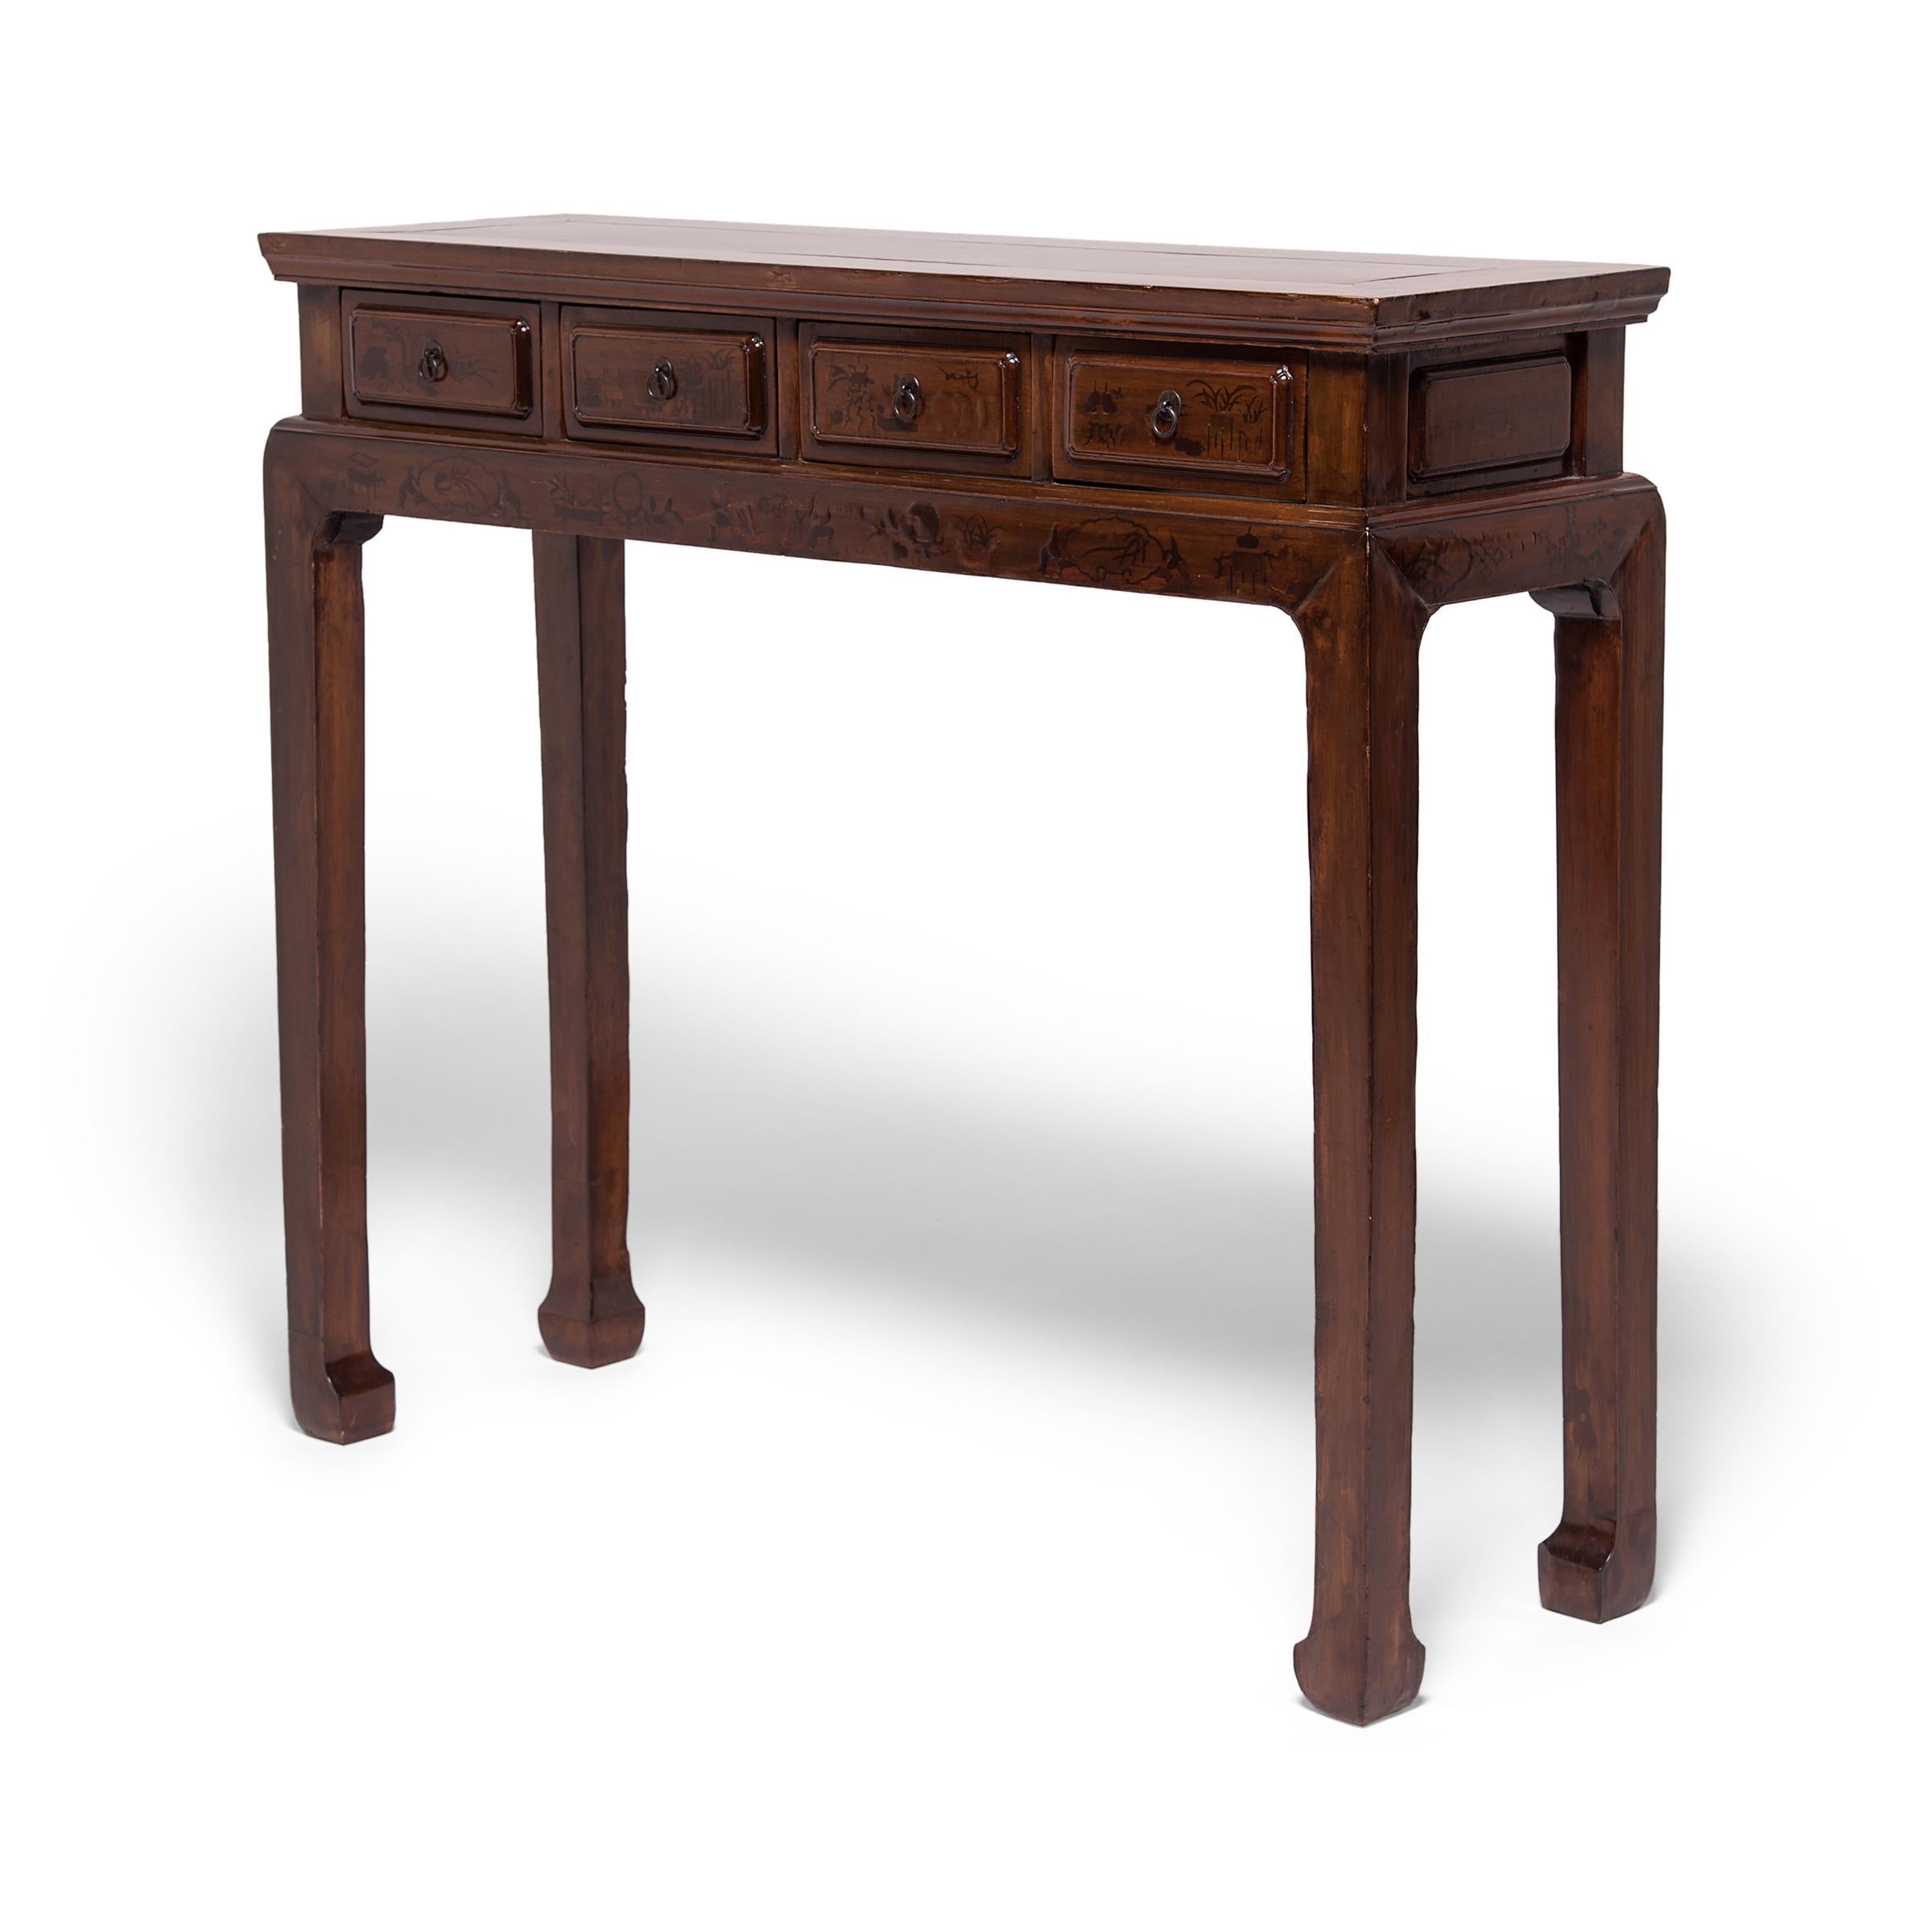 This shallow console table was crafted over 150 years ago in China's Fujian province, and was originally used as an altar table storing incense and other offerings. Elegantly constructed with mortise-and-tenon joinery techniques, the altar is subtly